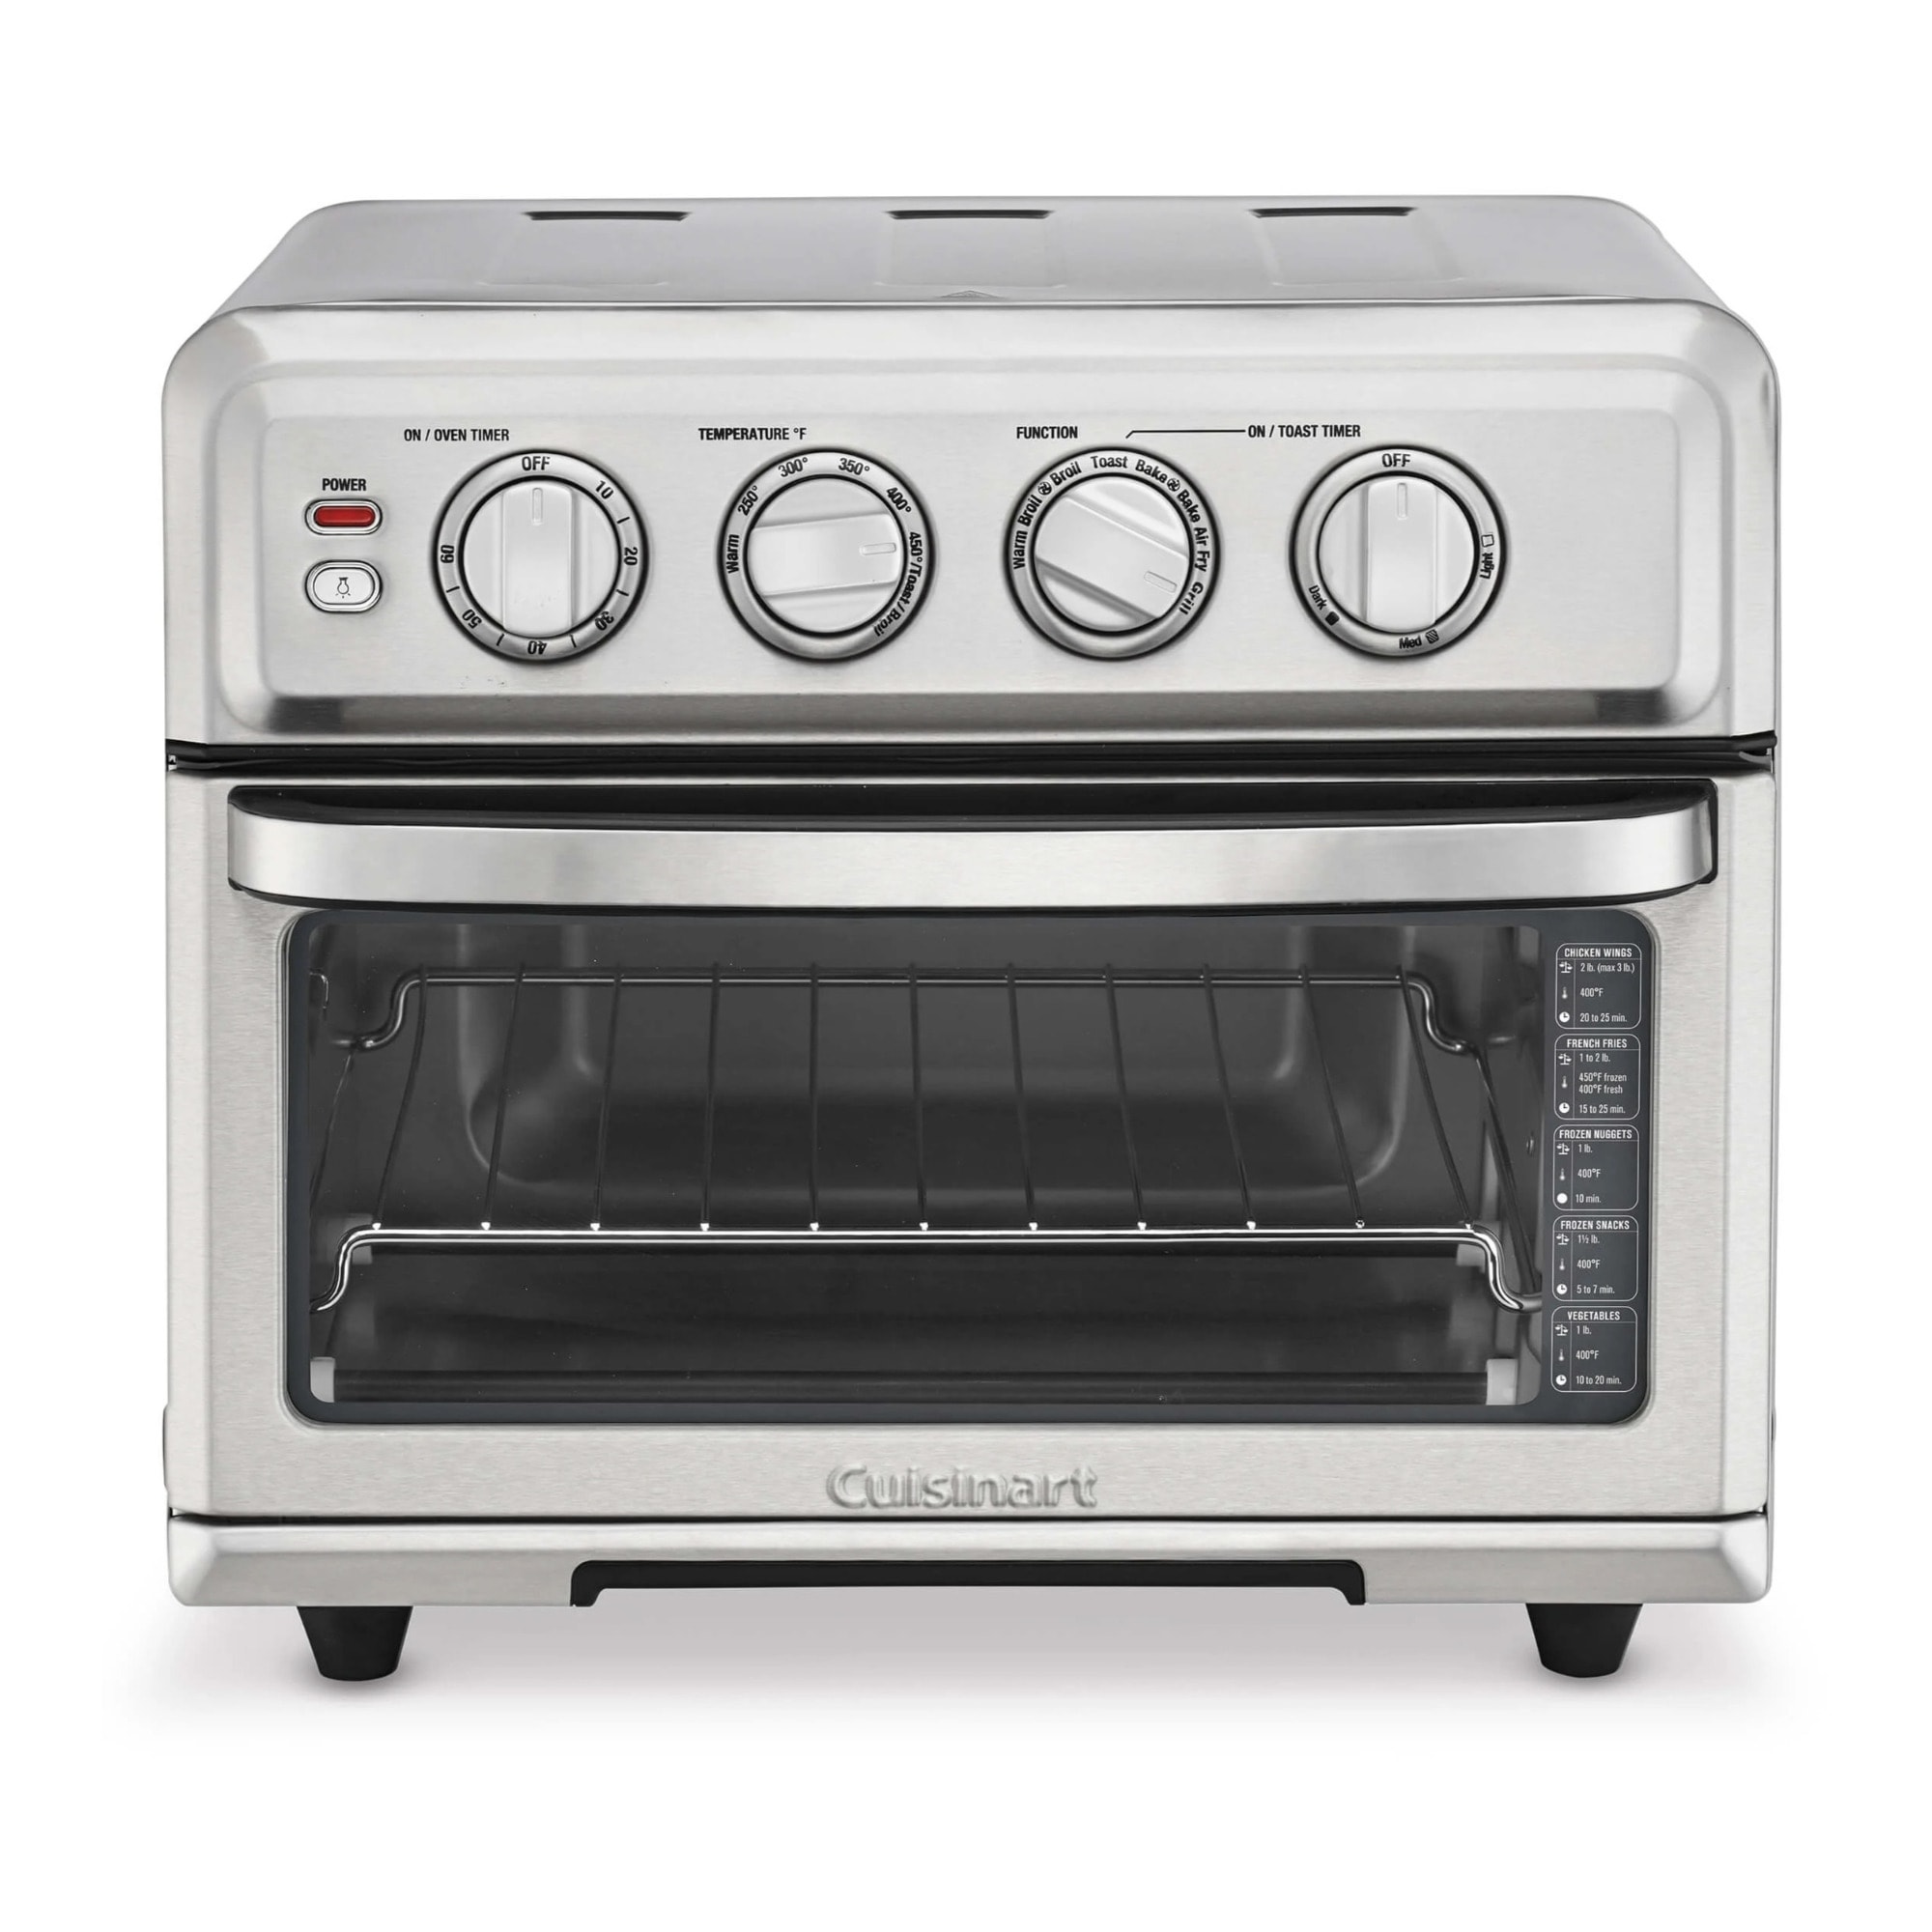 Ninja DCT401 Double Oven Air Fryer Conventional Oven Combo